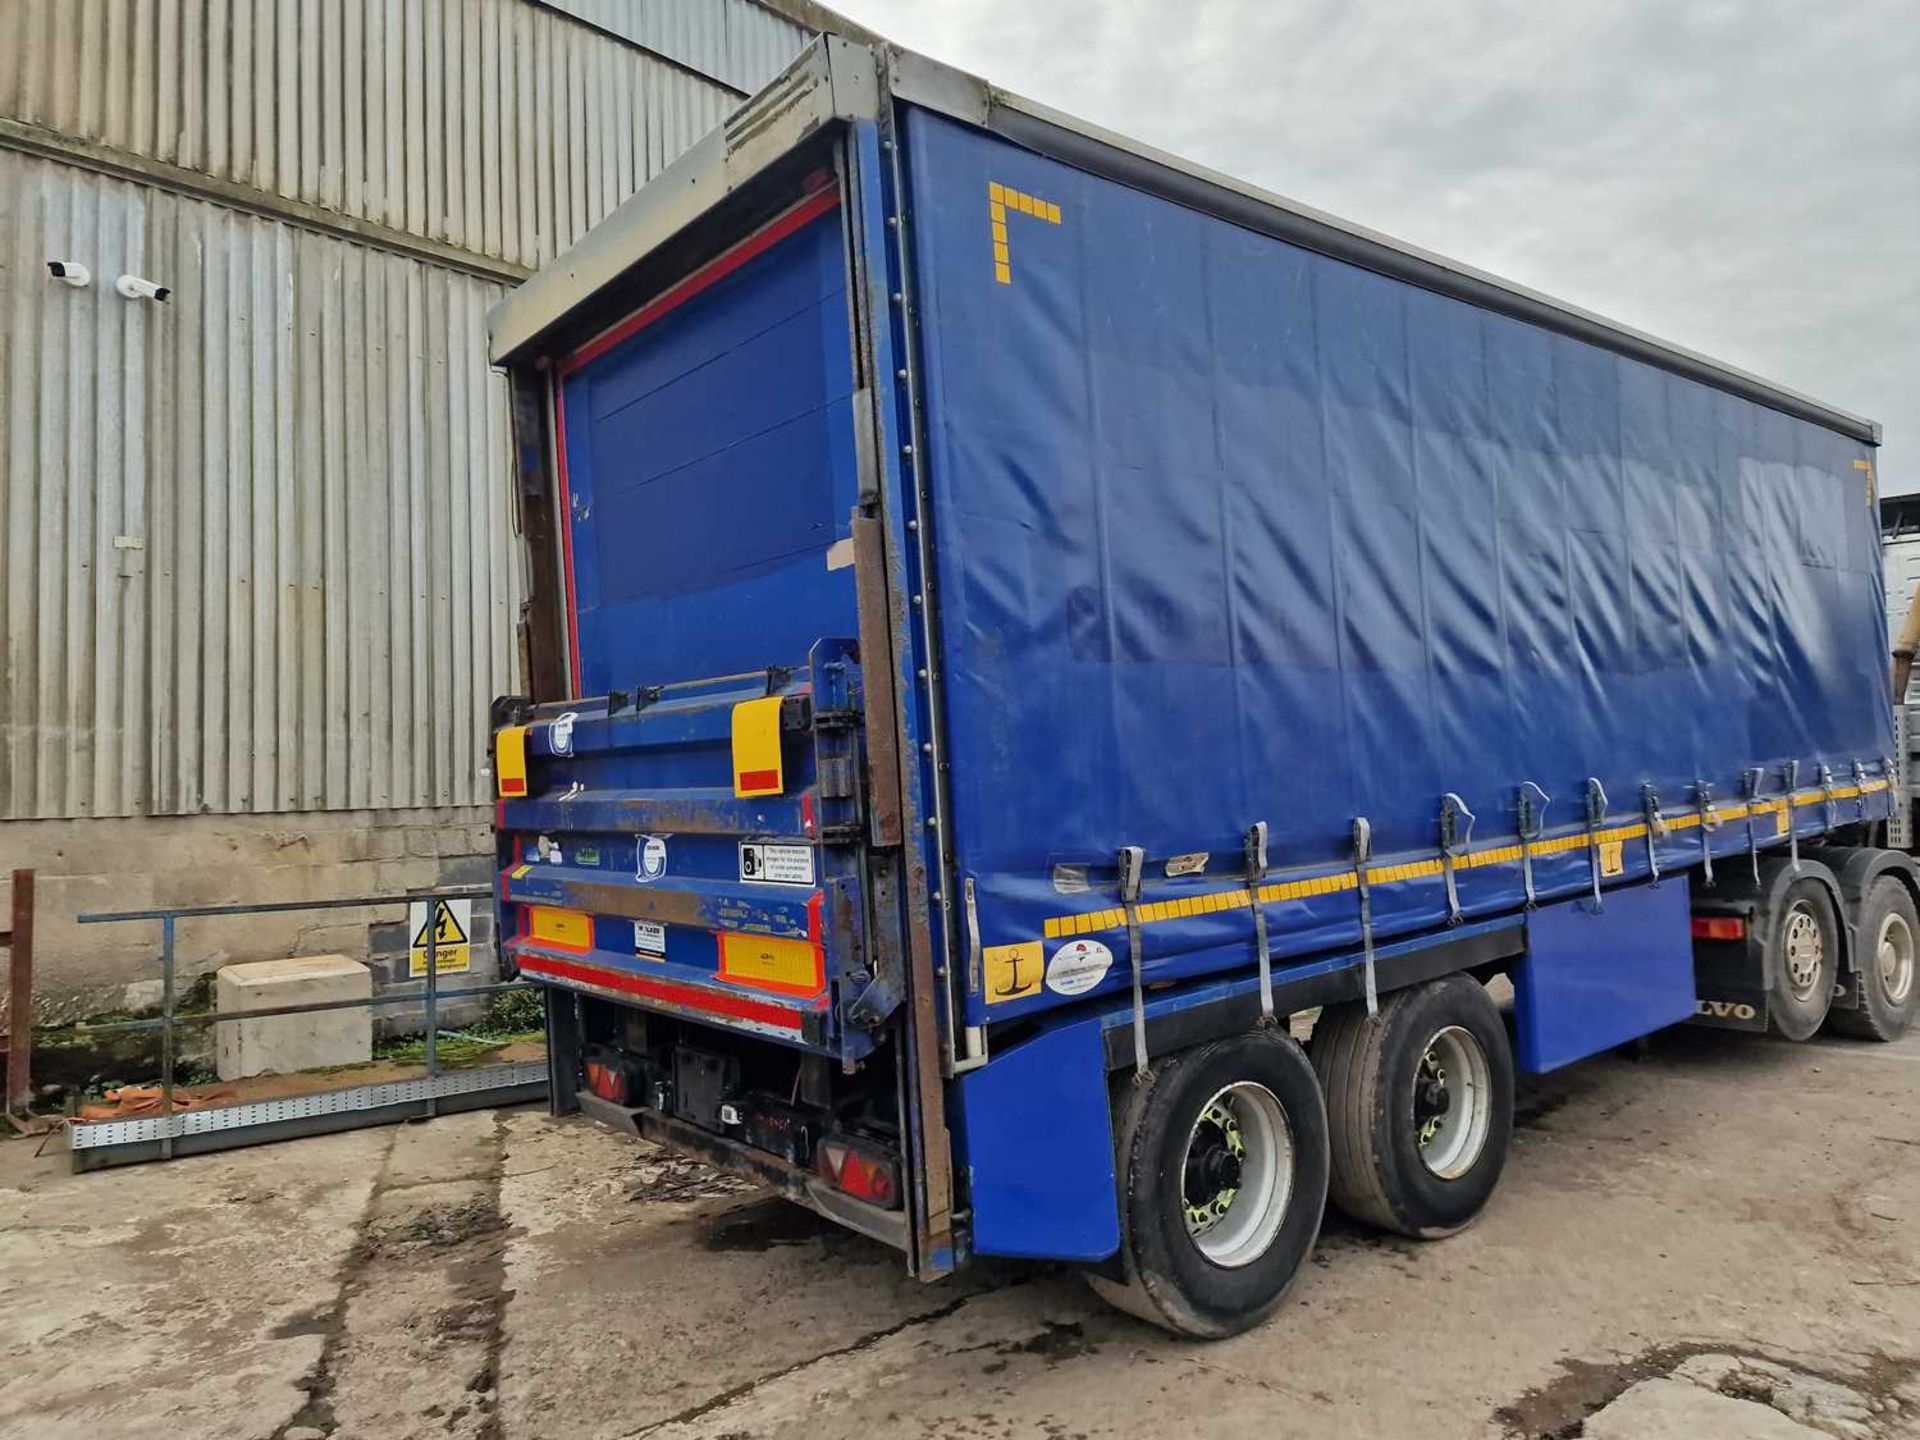 2011 SDC Twin Axle Urban Curtainsider Trailer, DHollandia Tail Lift - Image 3 of 15